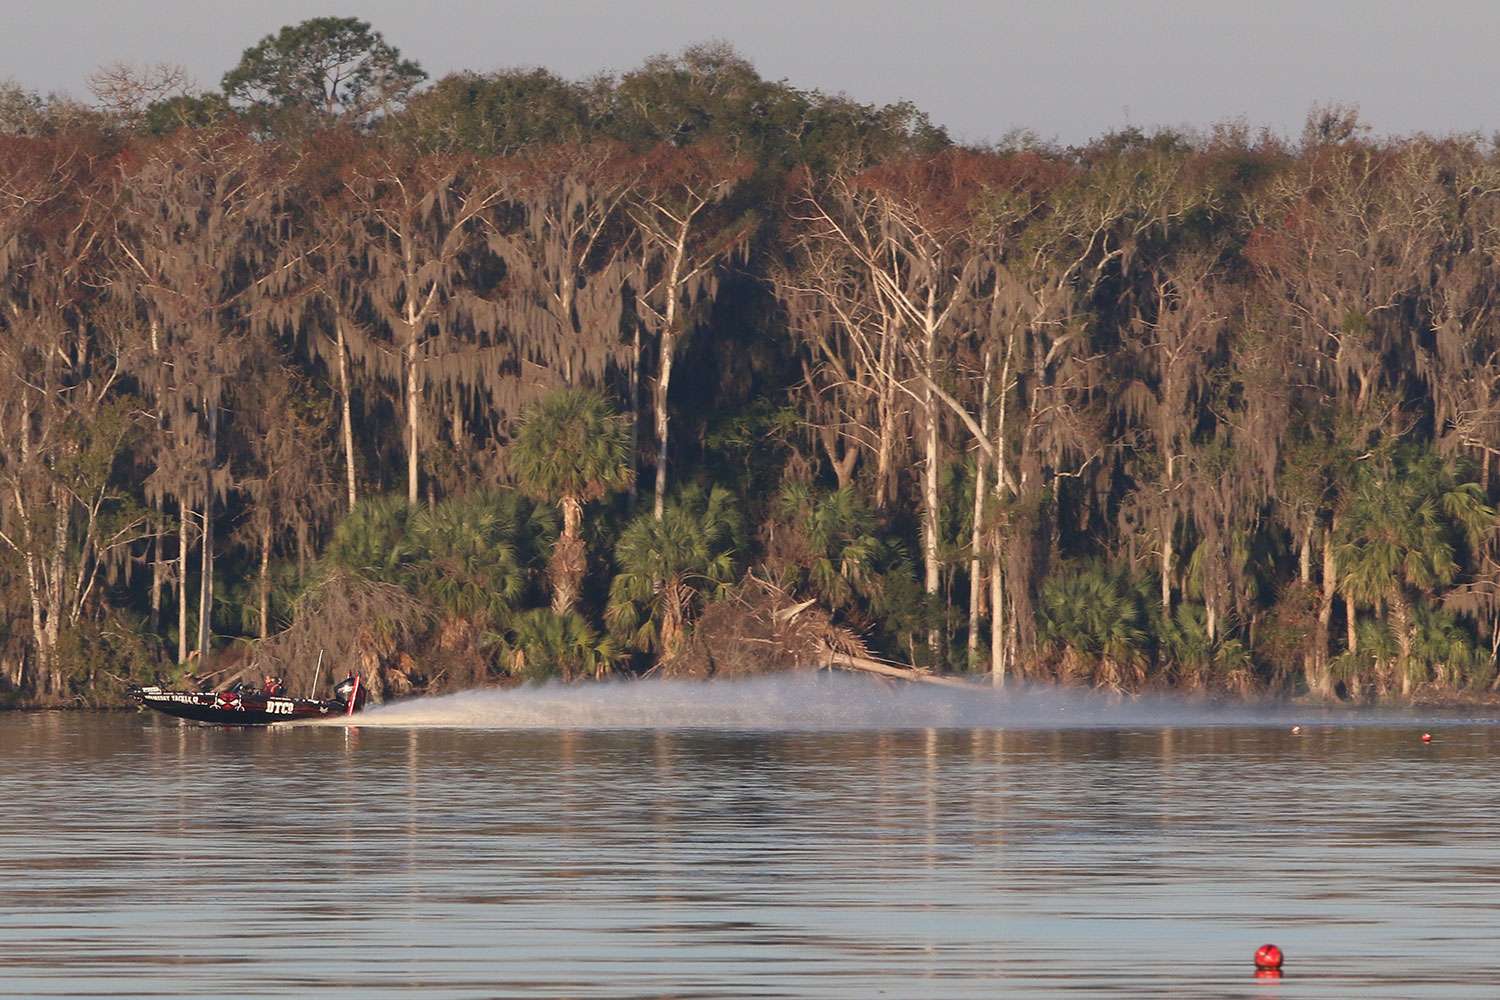 Catch up with John Crews, David Mullins and more as they battle it out on the second morning of the 2019 Power-Pole Bassmaster Elite at St. Johns River!